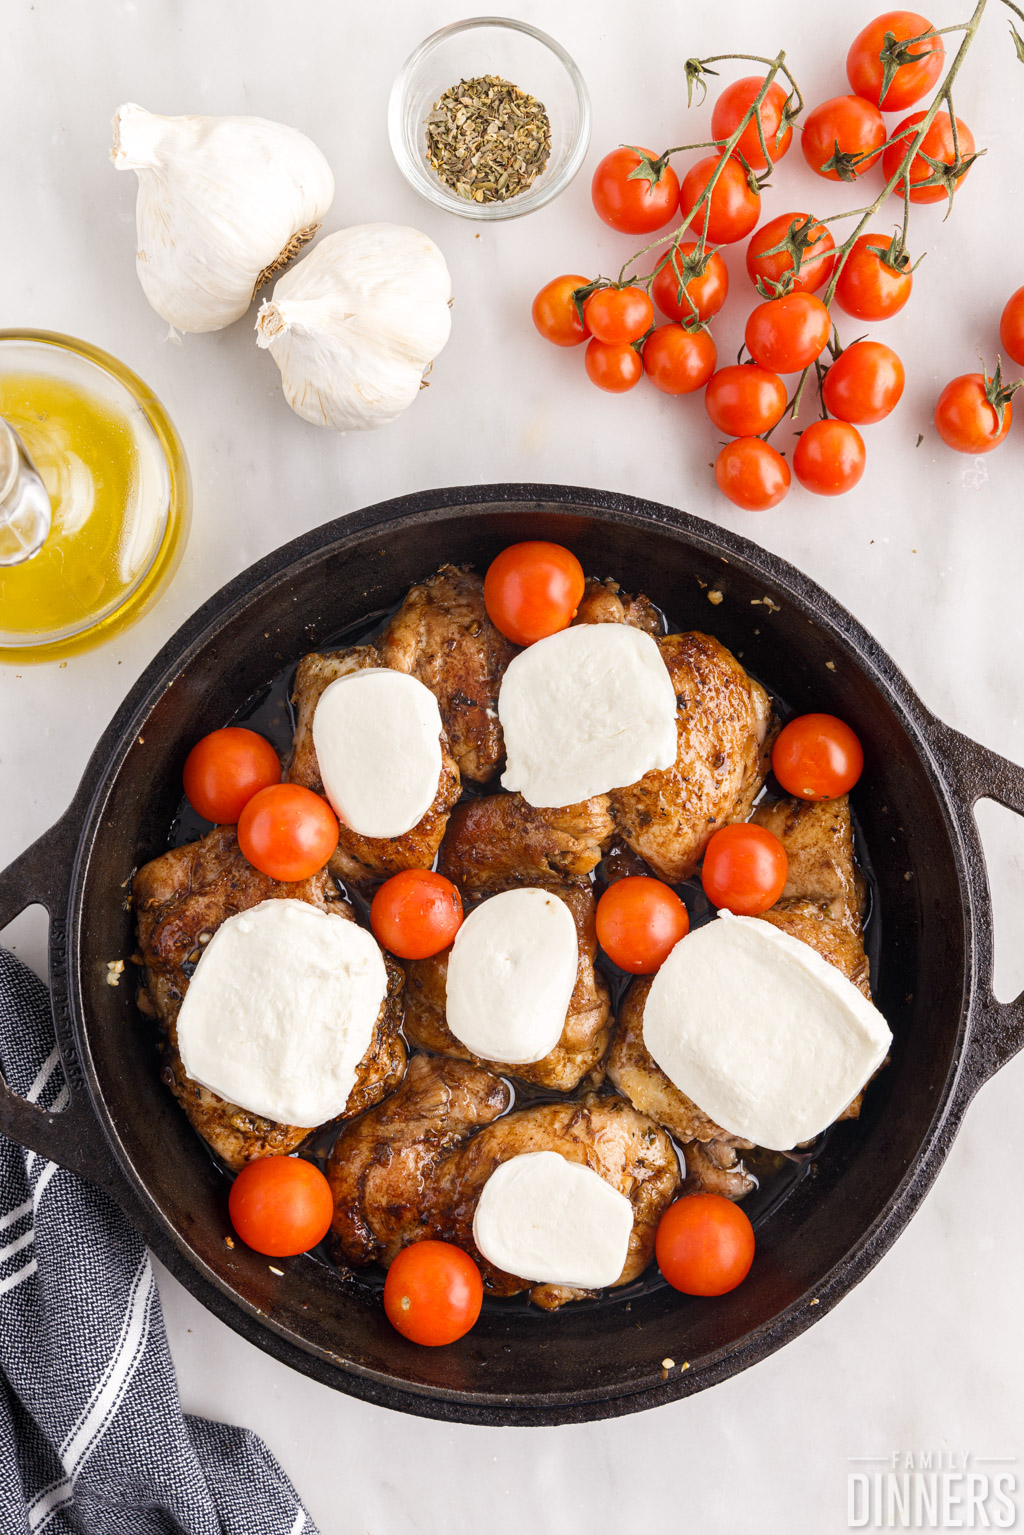 fresh mozzarella slices and raw tomatoes on chicken in a skillet.